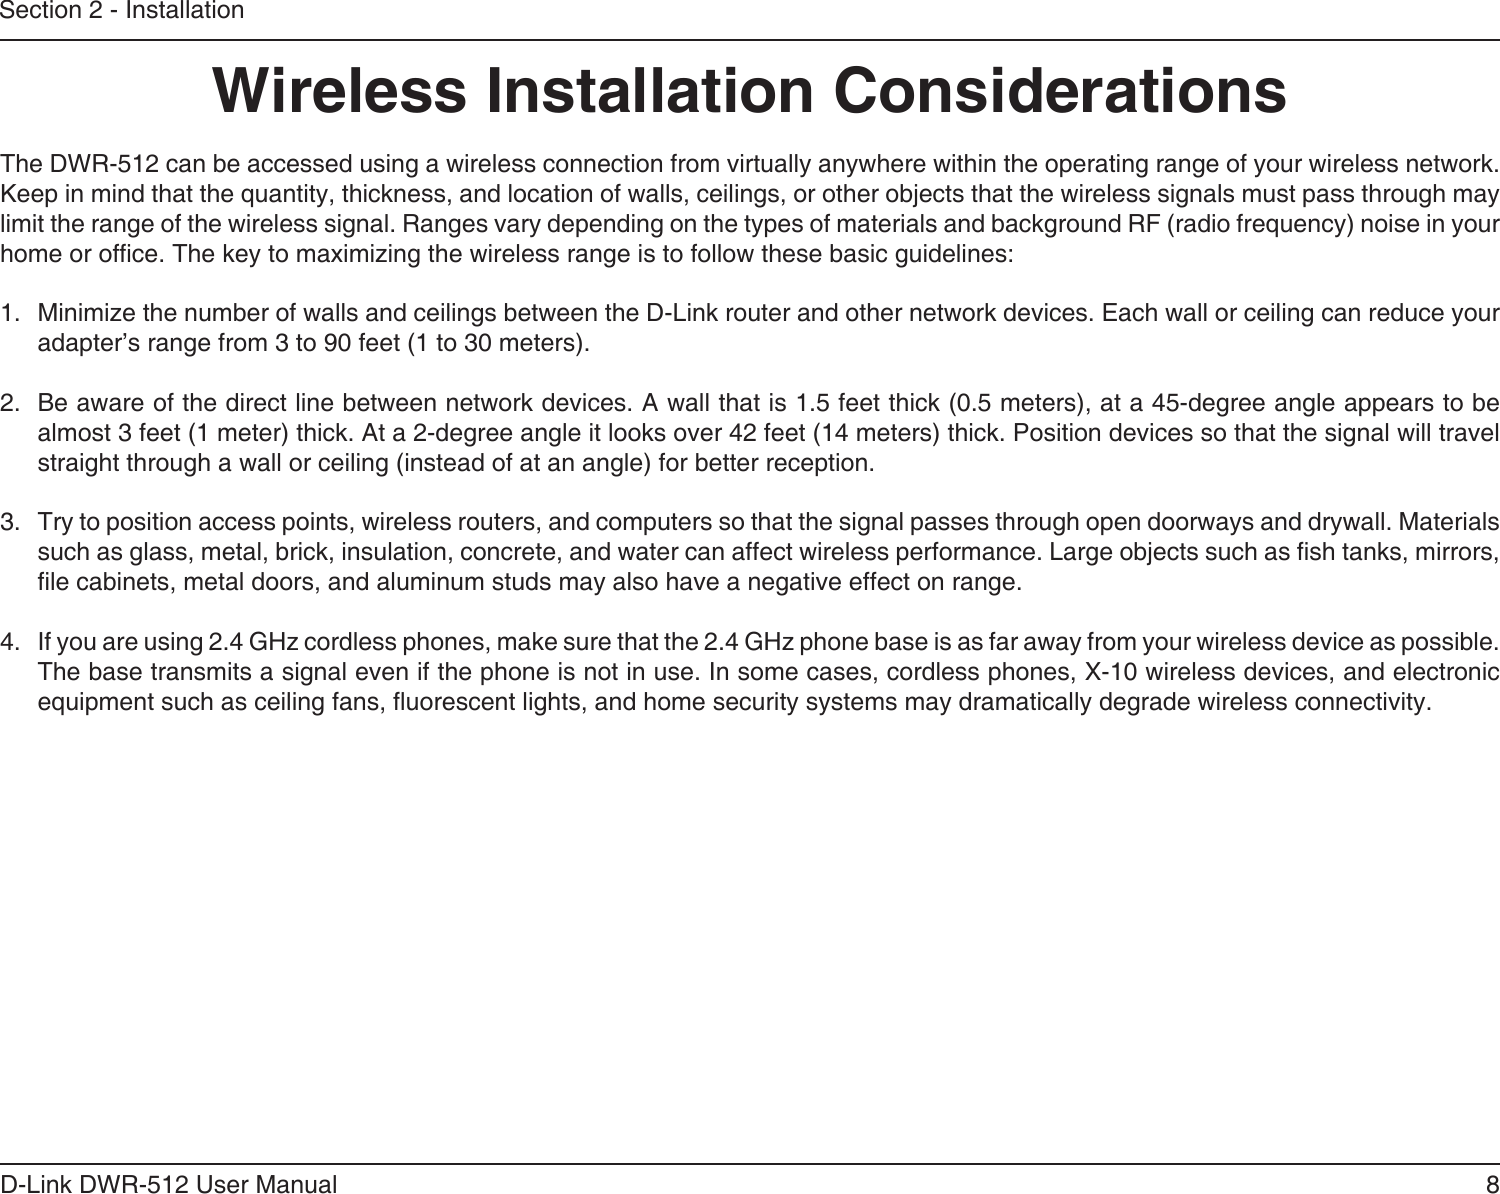 8D-Link DWR-512 User ManualSection 2 - InstallationWireless Installation ConsiderationsThe DWR-512 can be accessed using a wireless connection from virtually anywhere within the operating range of your wireless network. Keep in mind that the quantity, thickness, and location of walls, ceilings, or other objects that the wireless signals must pass through may limit the range of the wireless signal. Ranges vary depending on the types of materials and background RF (radio frequency) noise in your home or ofce. The key to maximizing the wireless range is to follow these basic guidelines:1.  Minimize the number of walls and ceilings between the D-Link router and other network devices. Each wall or ceiling can reduce your adapter’s range from 3 to 90 feet (1 to 30 meters).2.  Be aware of the direct line between network devices. A wall that is 1.5 feet thick (0.5 meters), at a 45-degree angle appears to be almost 3 feet (1 meter) thick. At a 2-degree angle it looks over 42 feet (14 meters) thick. Position devices so that the signal will travel straight through a wall or ceiling (instead of at an angle) for better reception.3.  Try to position access points, wireless routers, and computers so that the signal passes through open doorways and drywall. Materials such as glass, metal, brick, insulation, concrete, and water can affect wireless performance. Large objects such as sh tanks, mirrors, le cabinets, metal doors, and aluminum studs may also have a negative effect on range.4.  If you are using 2.4 GHz cordless phones, make sure that the 2.4 GHz phone base is as far away from your wireless device as possible. The base transmits a signal even if the phone is not in use. In some cases, cordless phones, X-10 wireless devices, and electronic equipment such as ceiling fans, uorescent lights, and home security systems may dramatically degrade wireless connectivity.